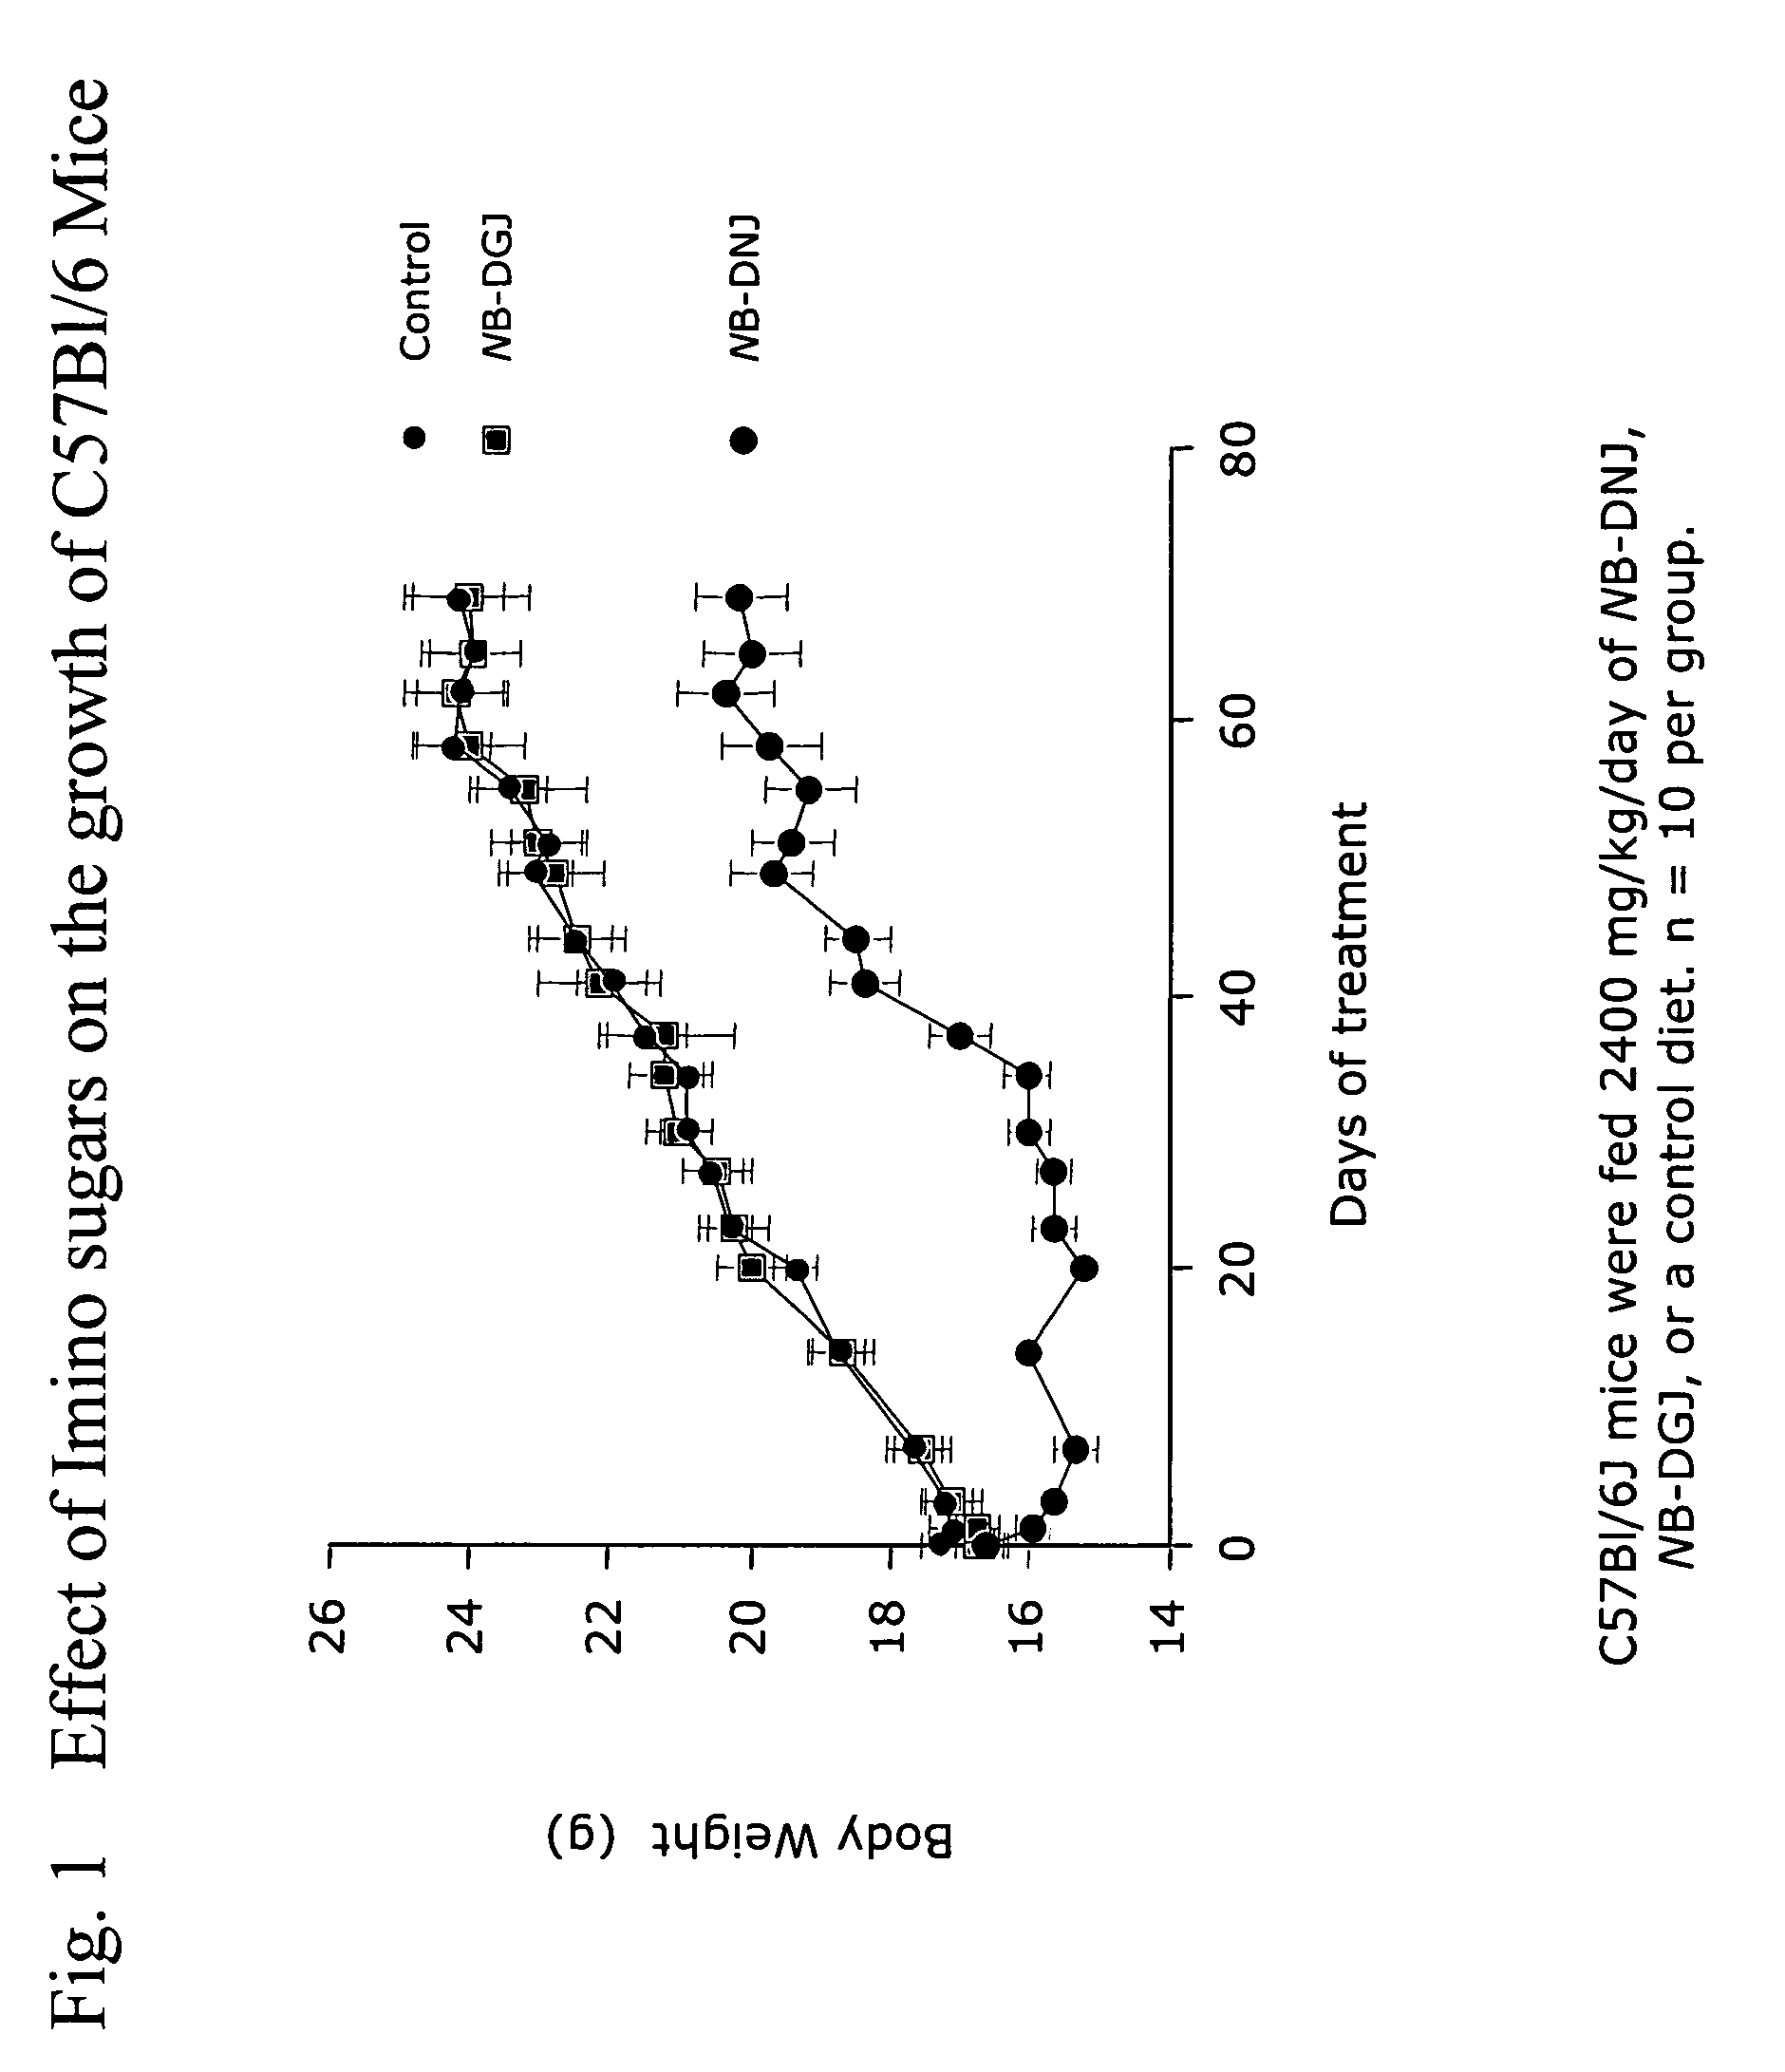 Use of N-substituted imino sugars for appetite suppression